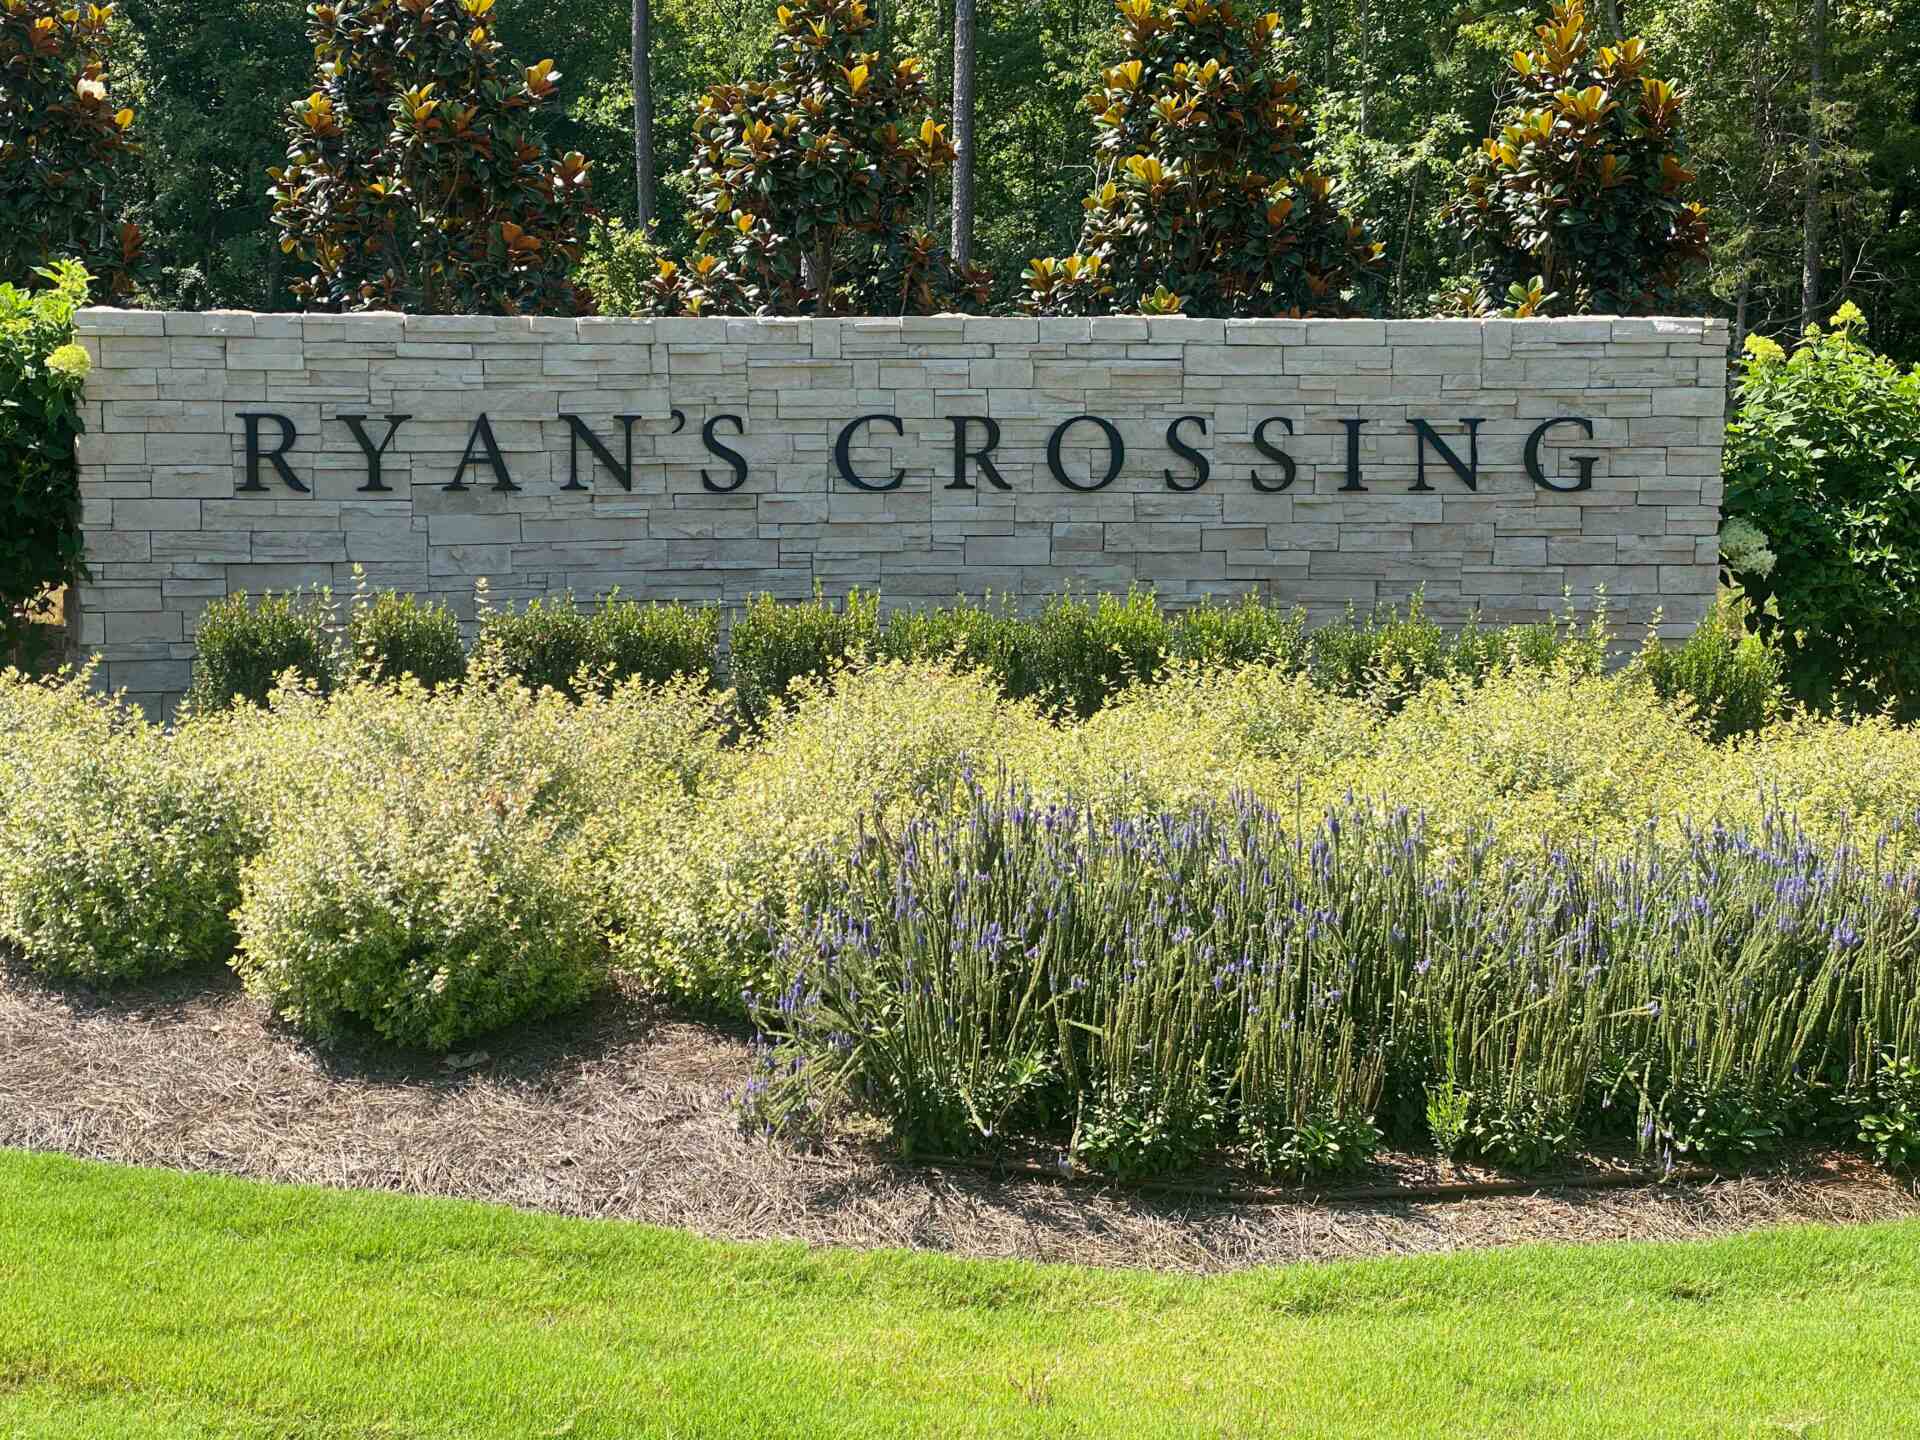 Ryans Crossing Name On a Wall and Bushes Around